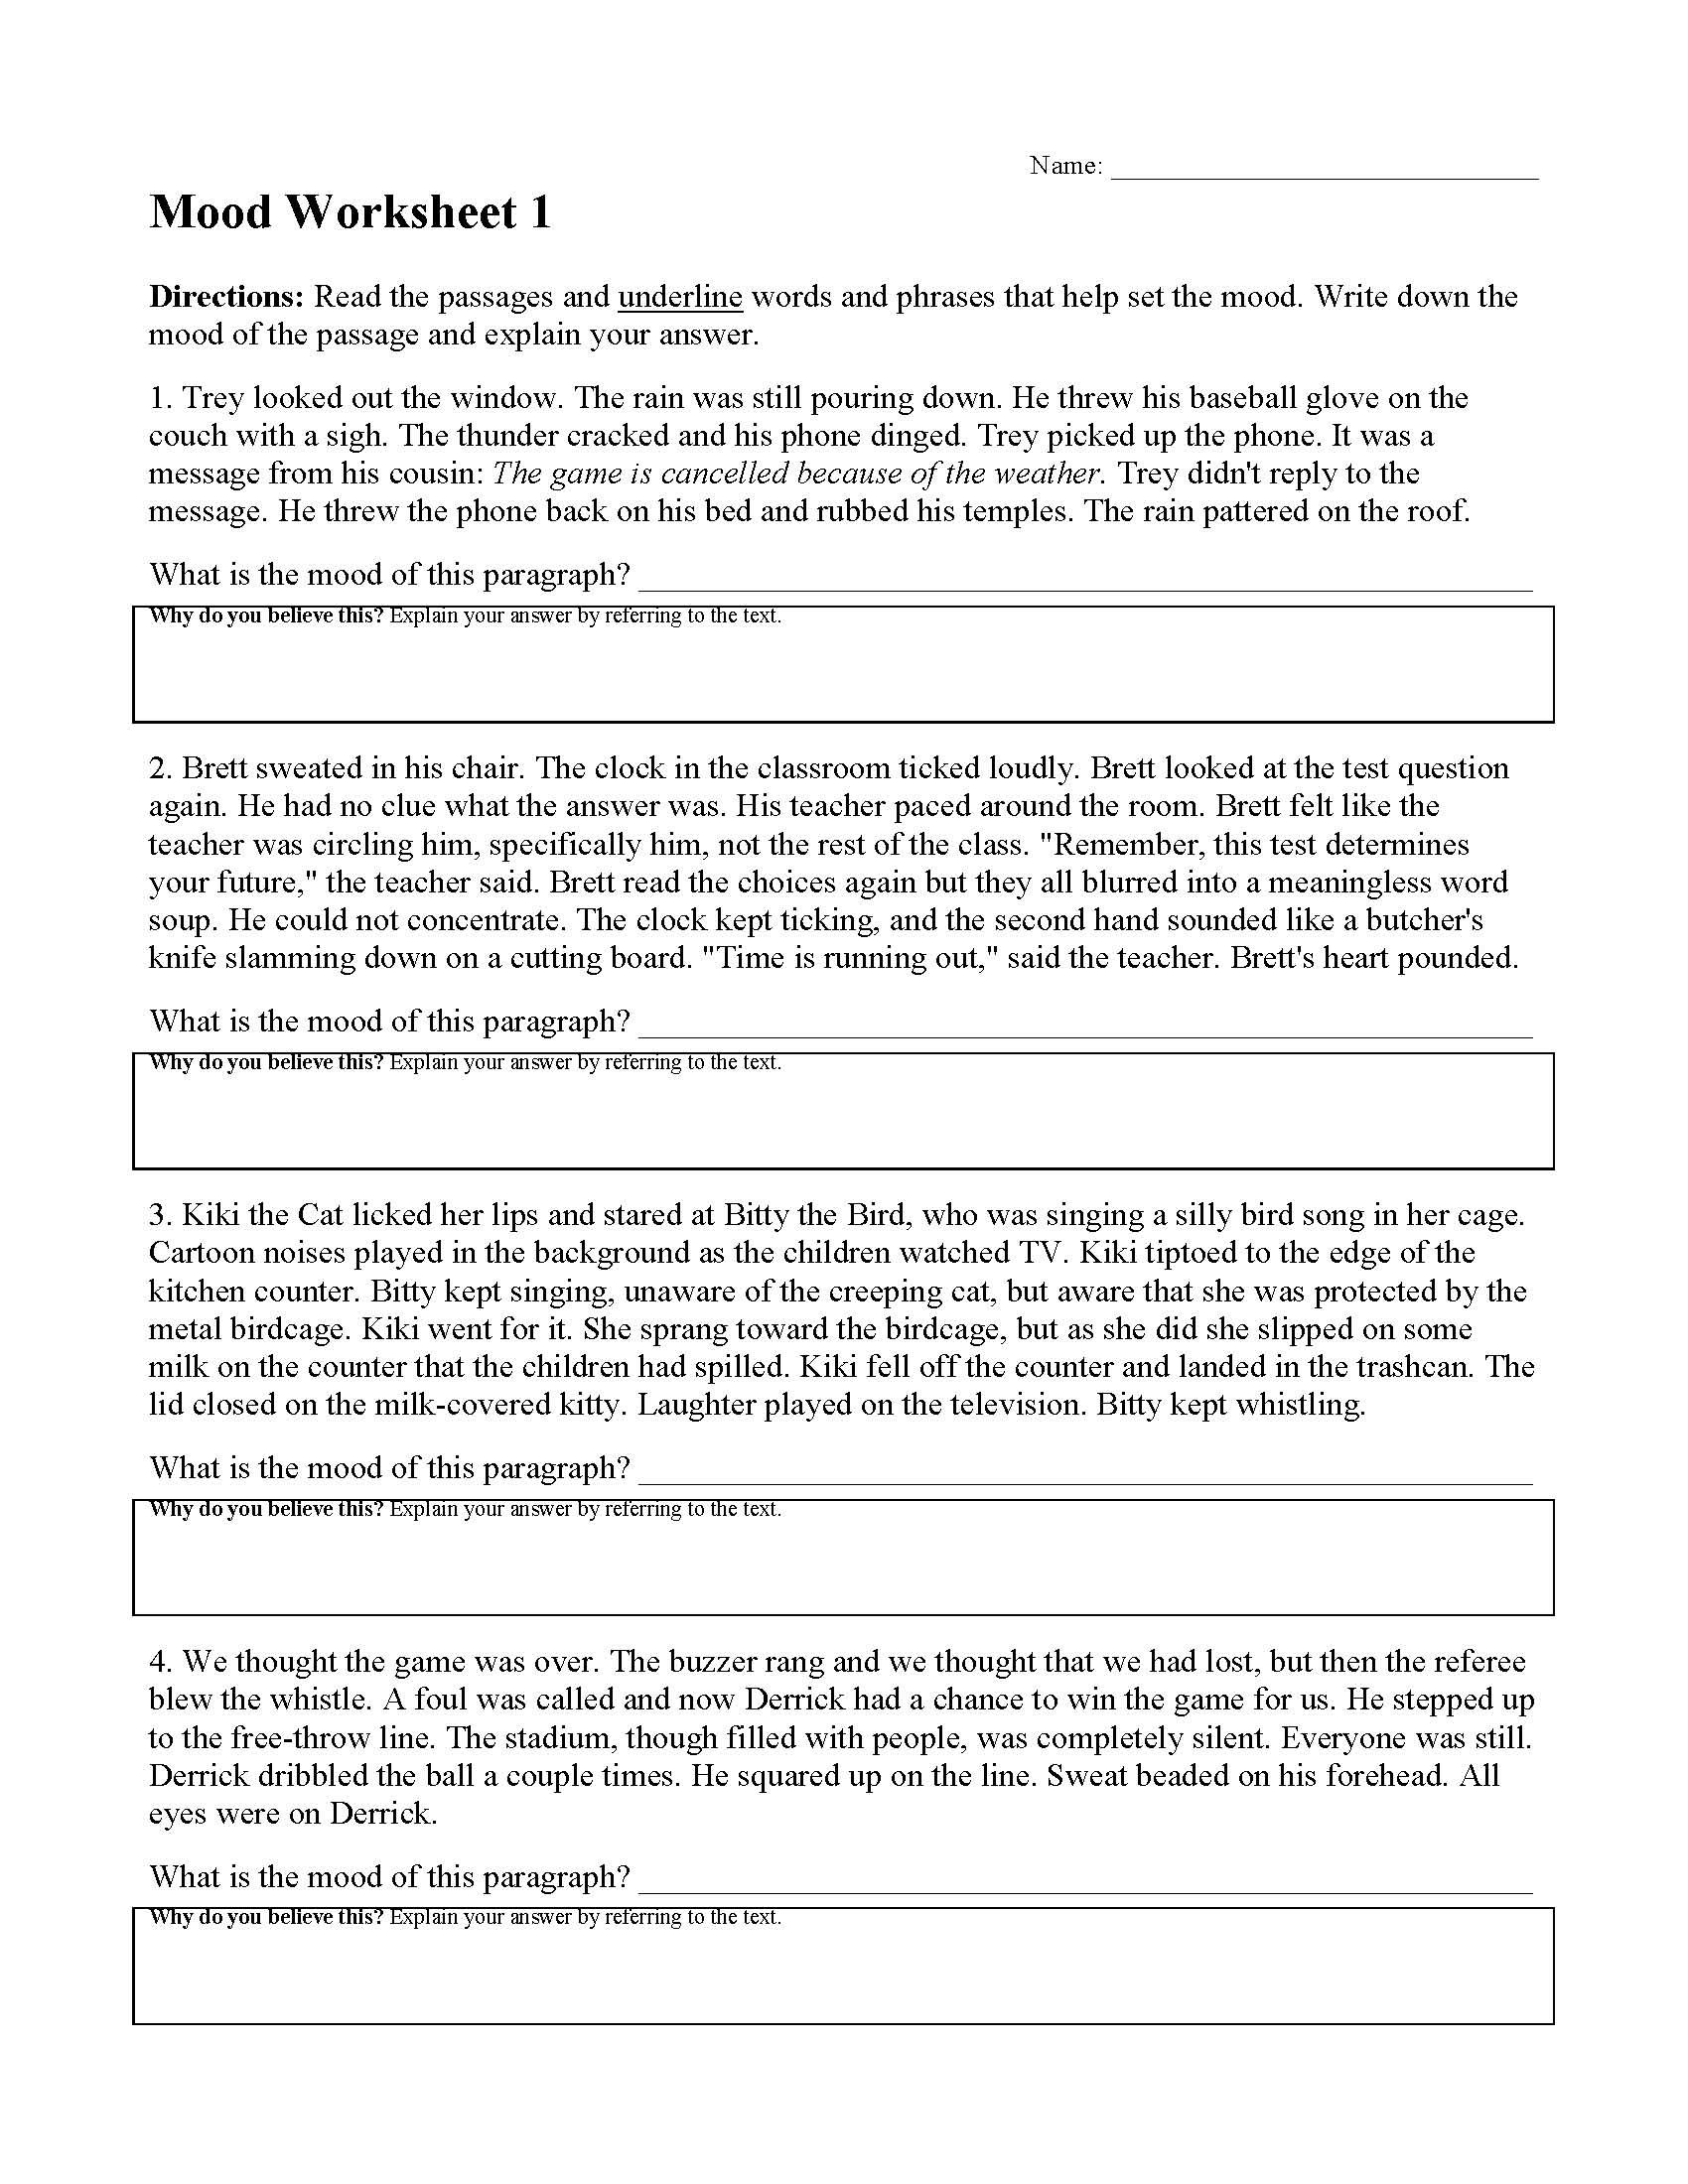 mood-worksheets-reading-comprehension-activities